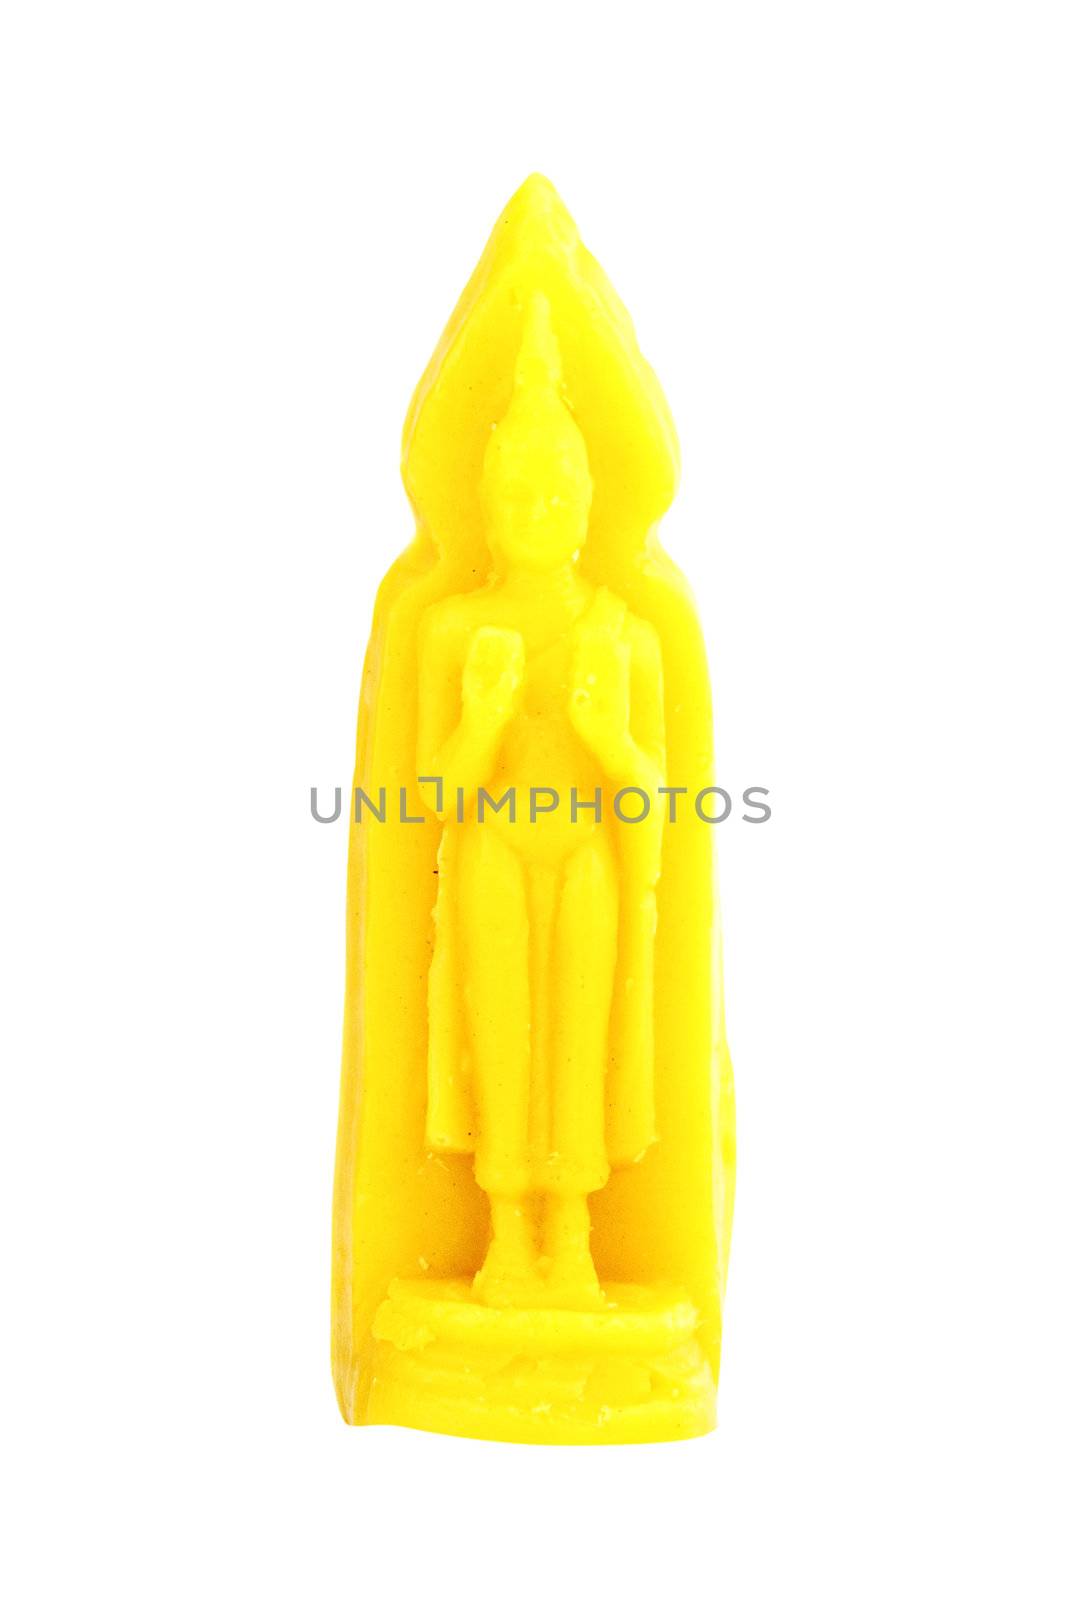 Buddha from the hand-carved candles by geargodz